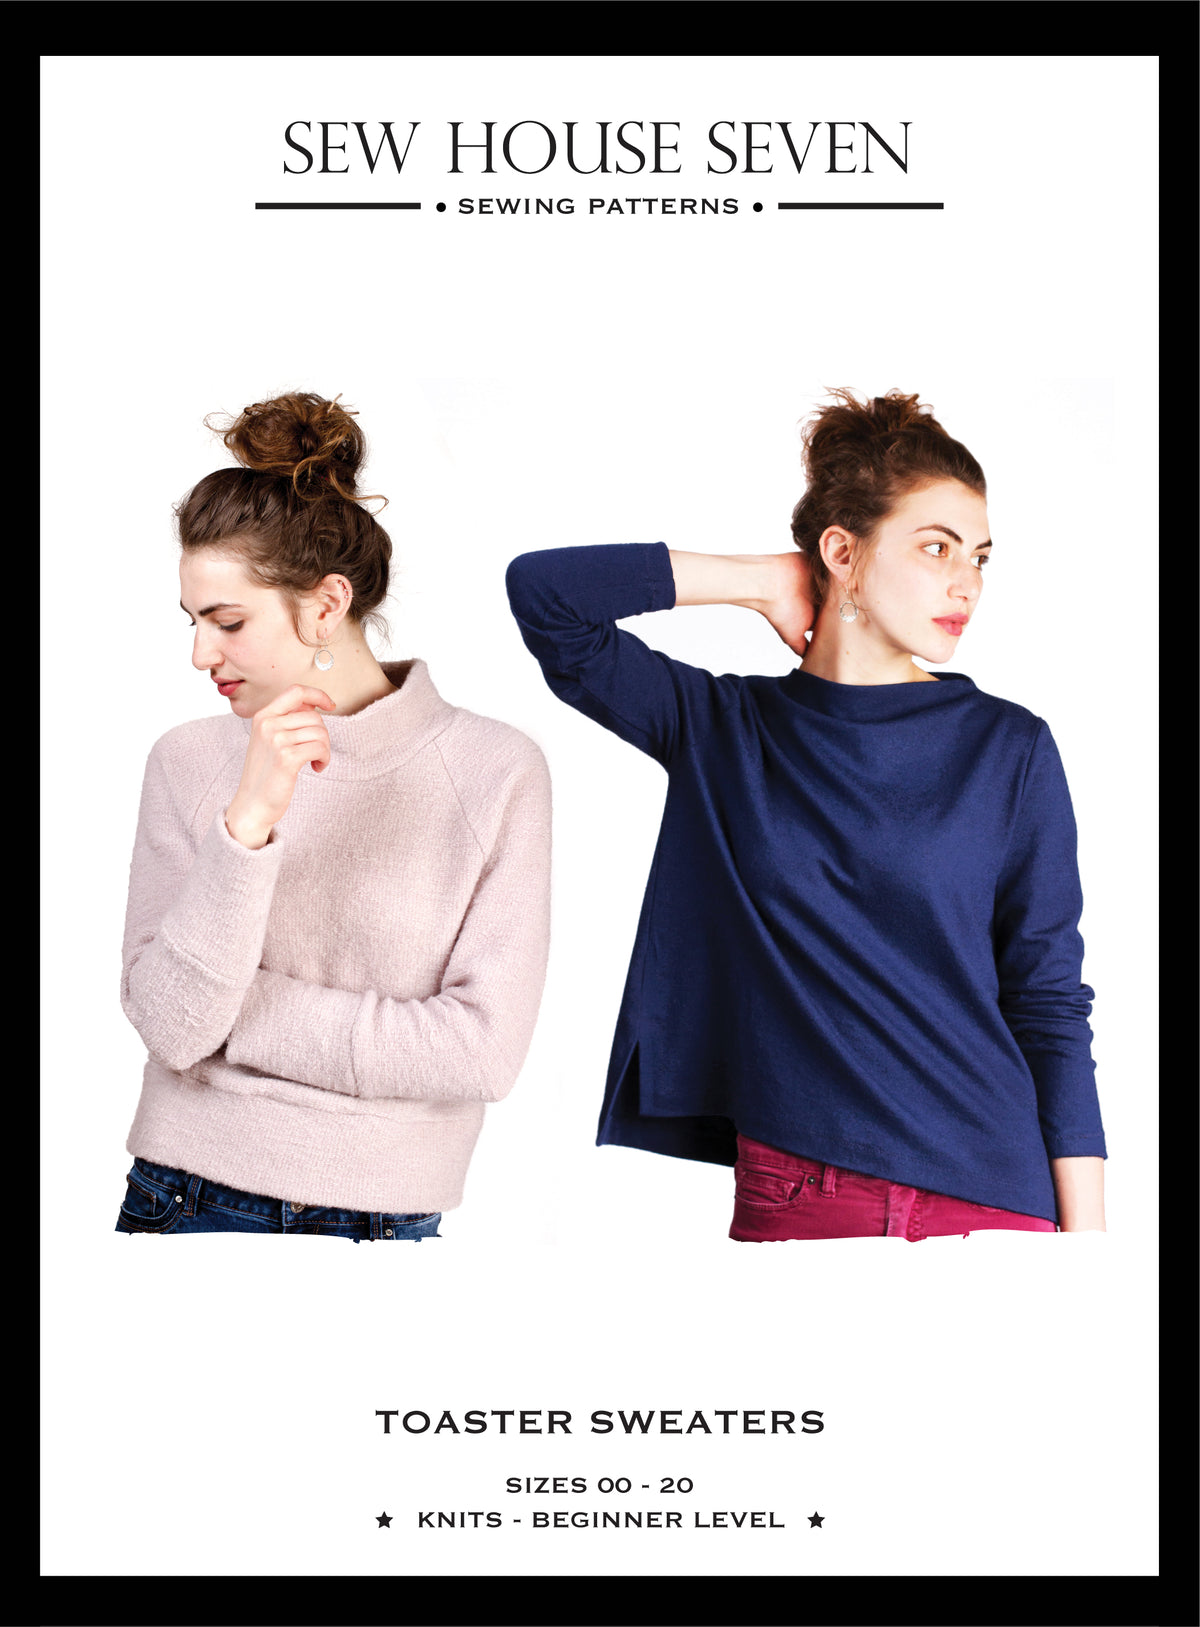 Toaster Sweaters - Sewing Pattern | Sew House 7